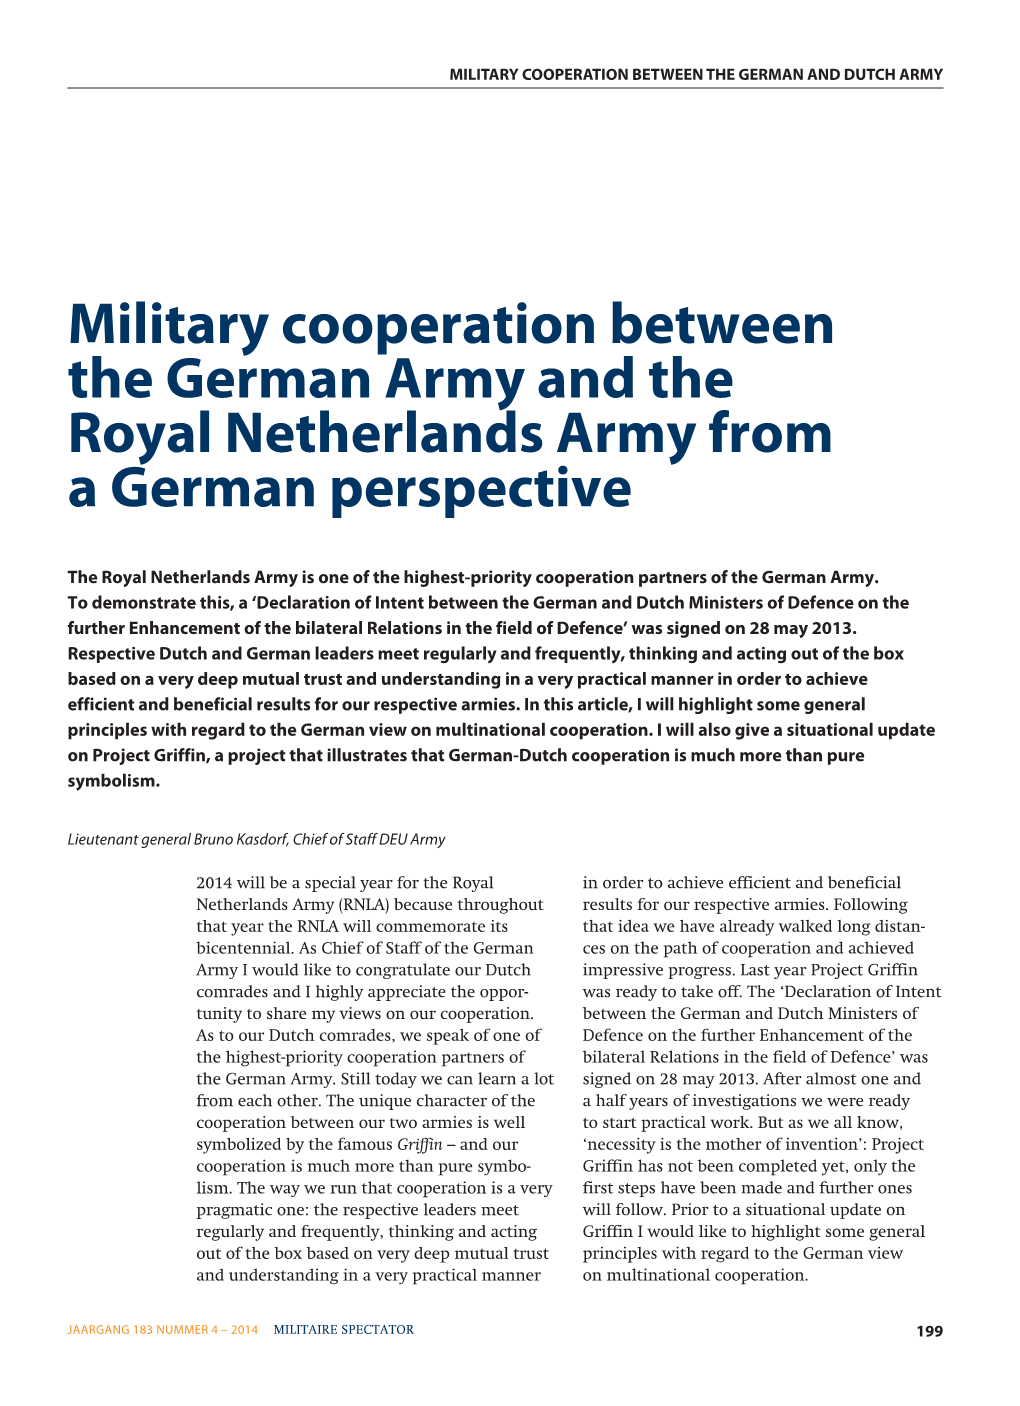 Military Cooperation Between the German Army and the Royal Netherlands Army from a German Perspective